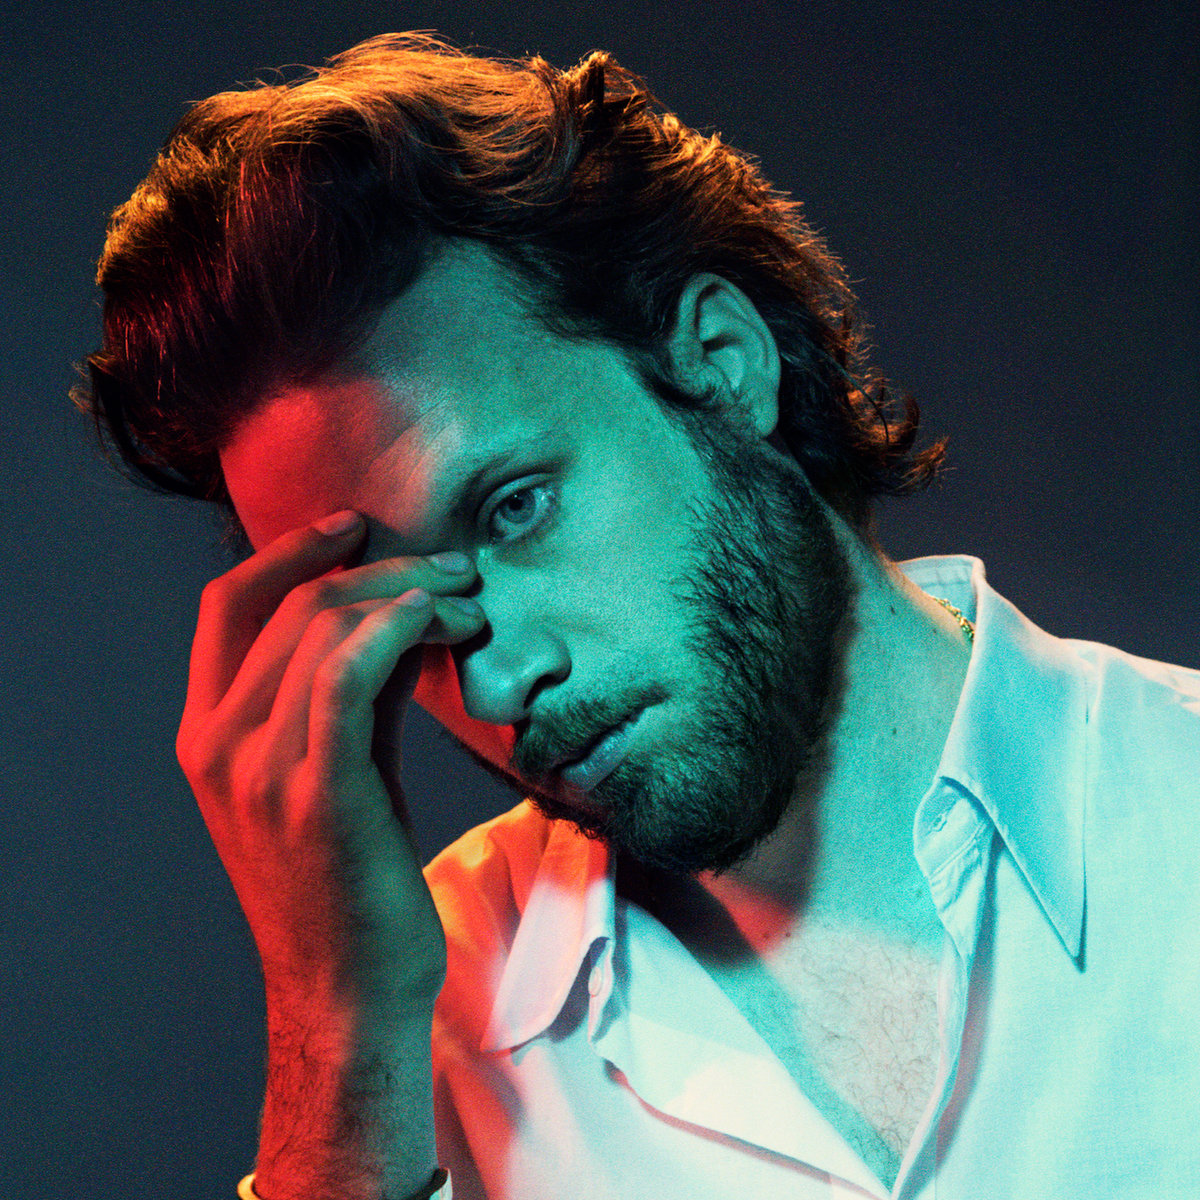 Father John Misty returns with a stronger Messiah complex